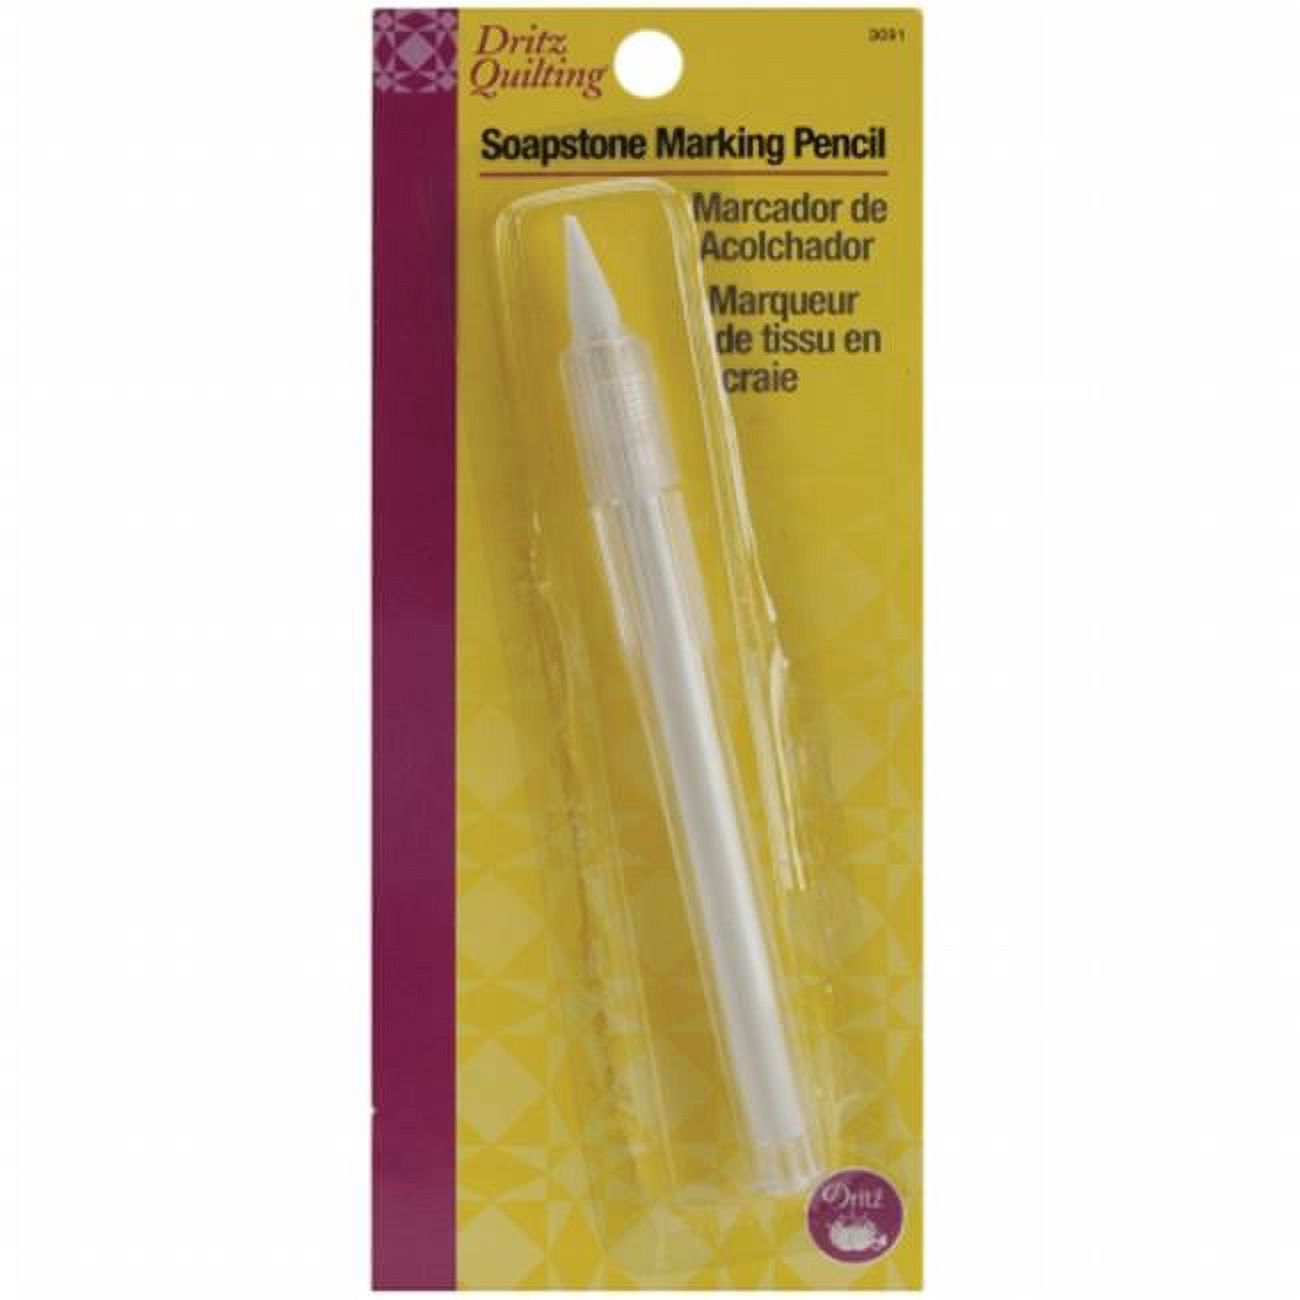 Dritz Quilting Soapstone Marking Pencil-White